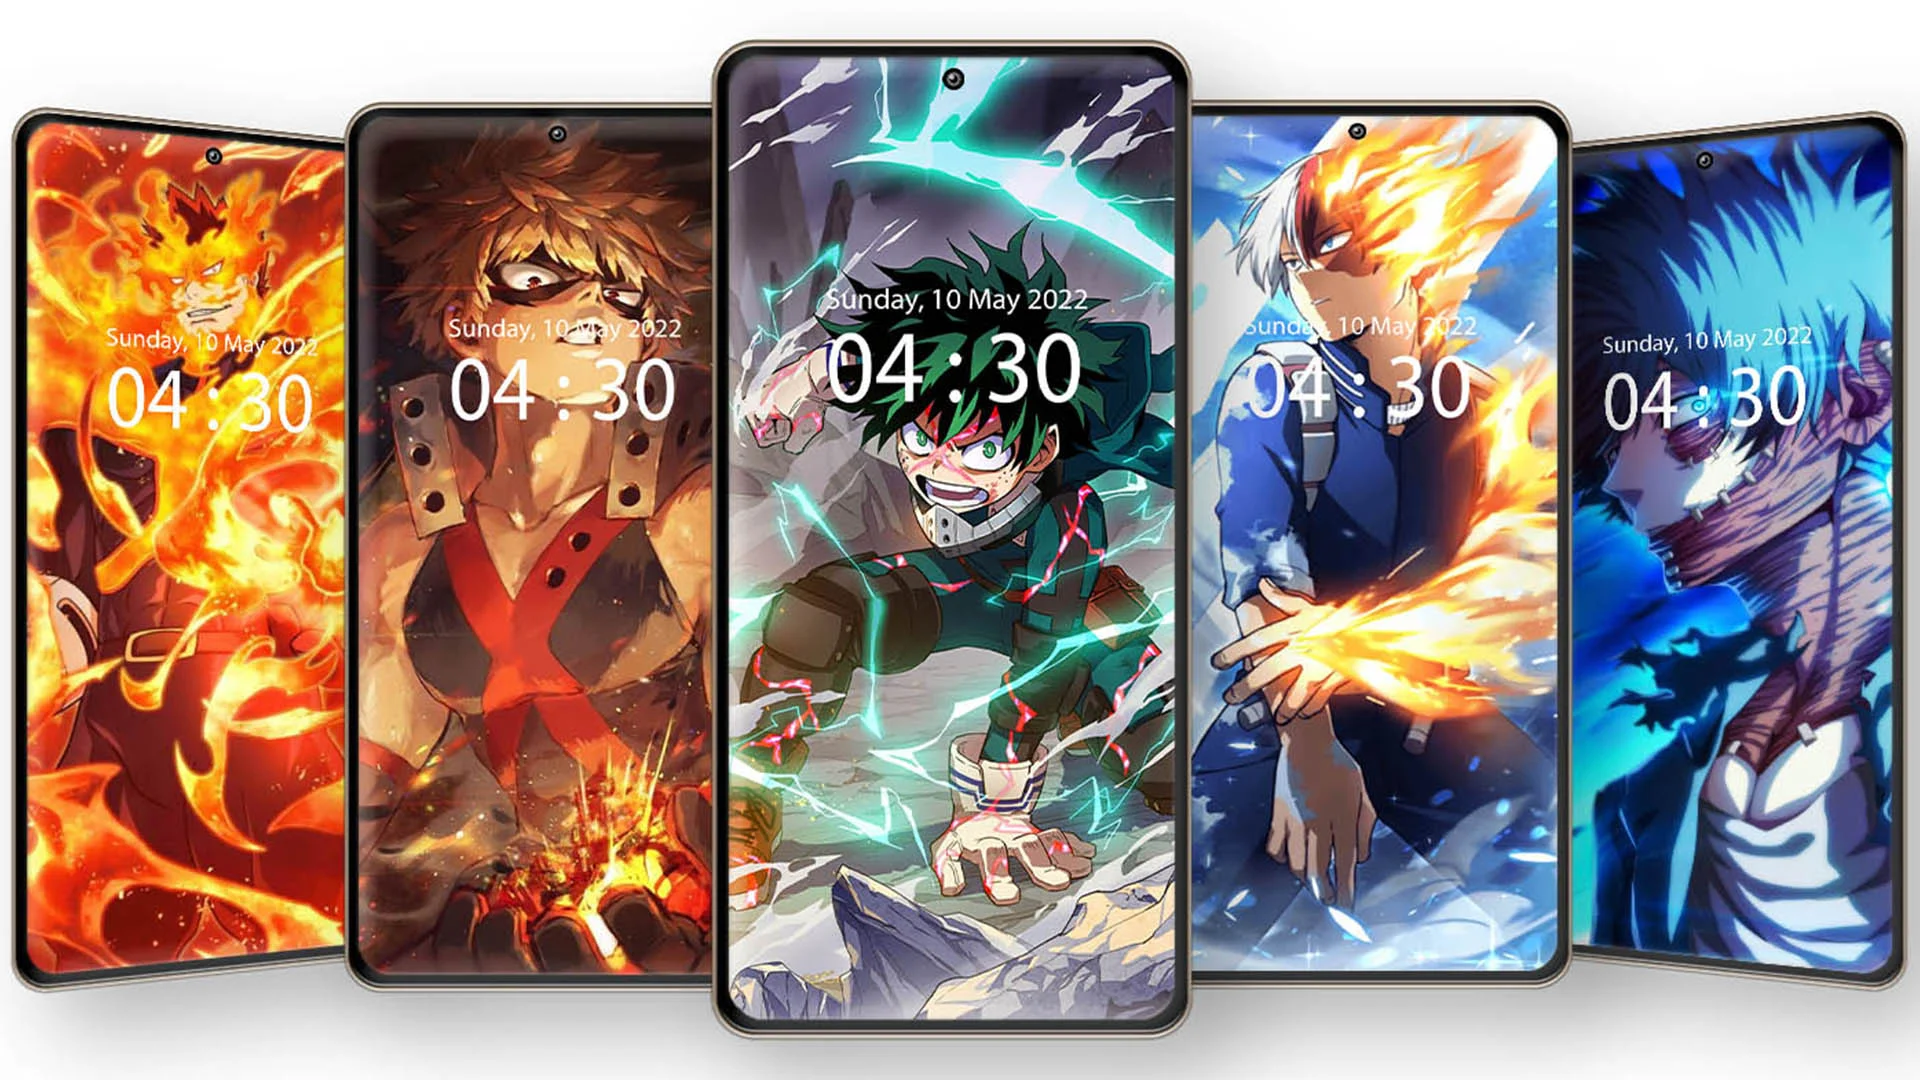 Anime Wallpapers 4K APK for Android Download